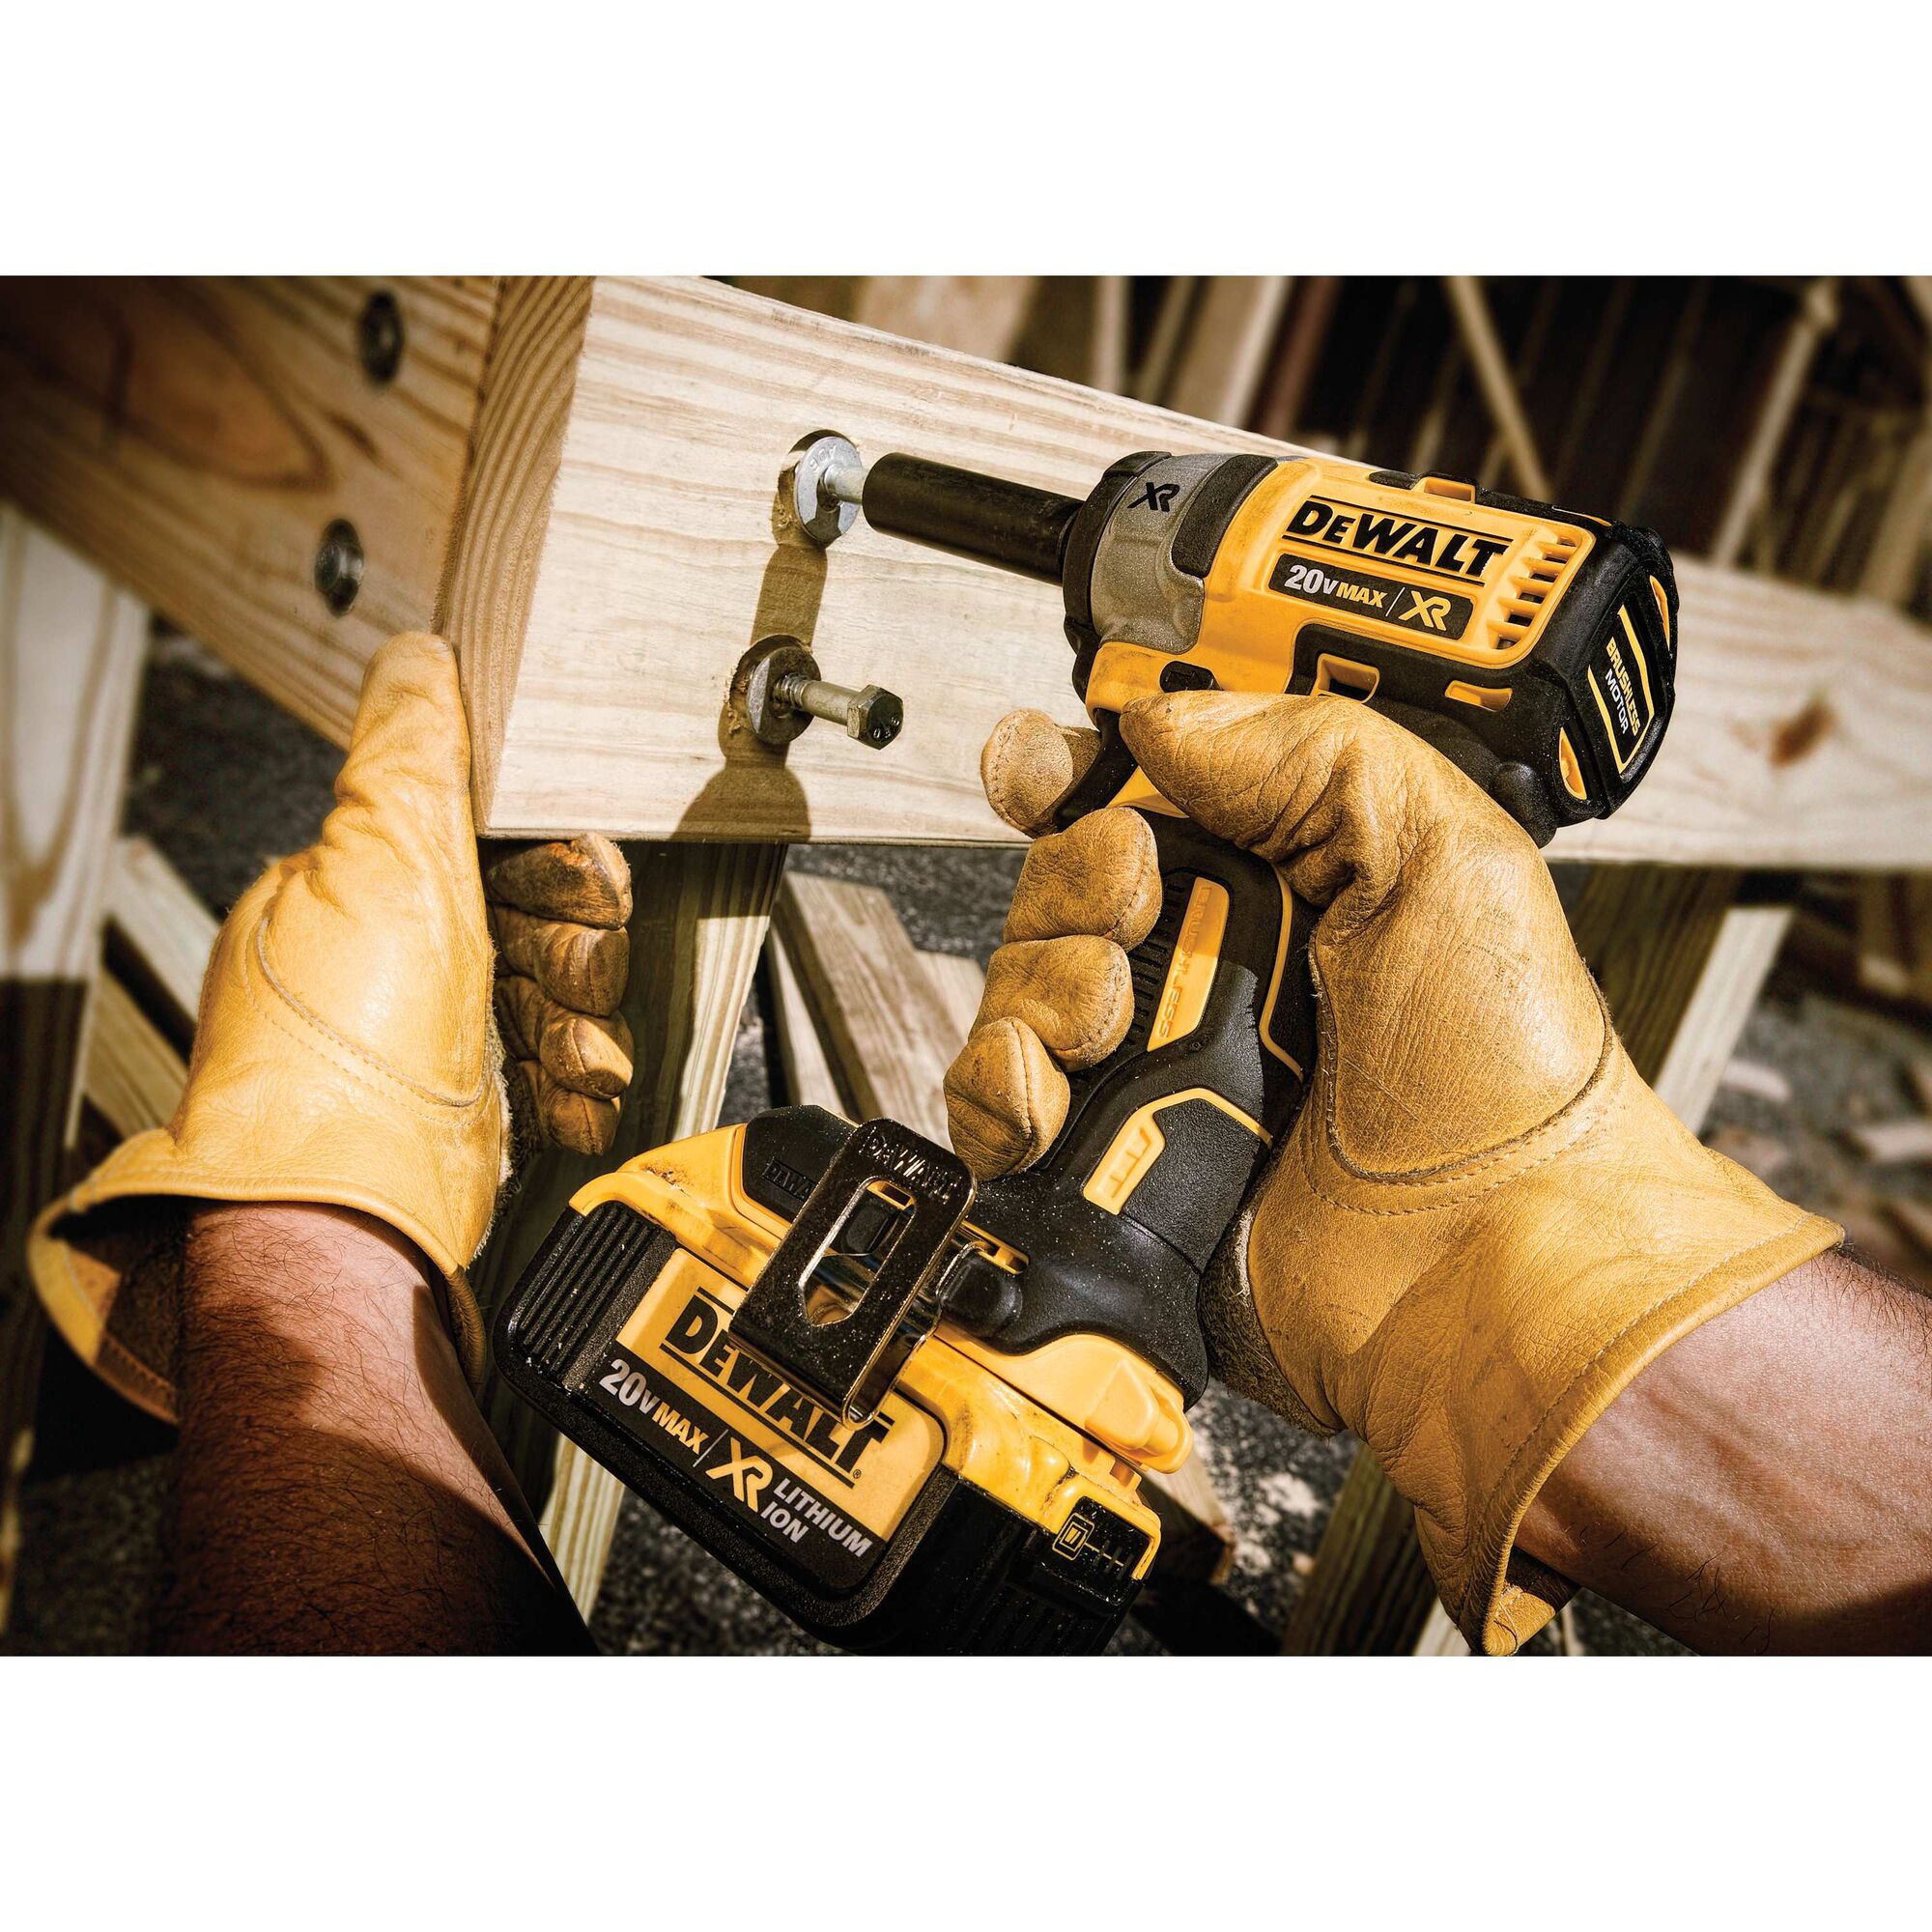 Renewed DEWALT DCF894BR 20V Max Xr 1/2 inches Mid-Range Cordless Impact Wrench with Detent Pin Anvil